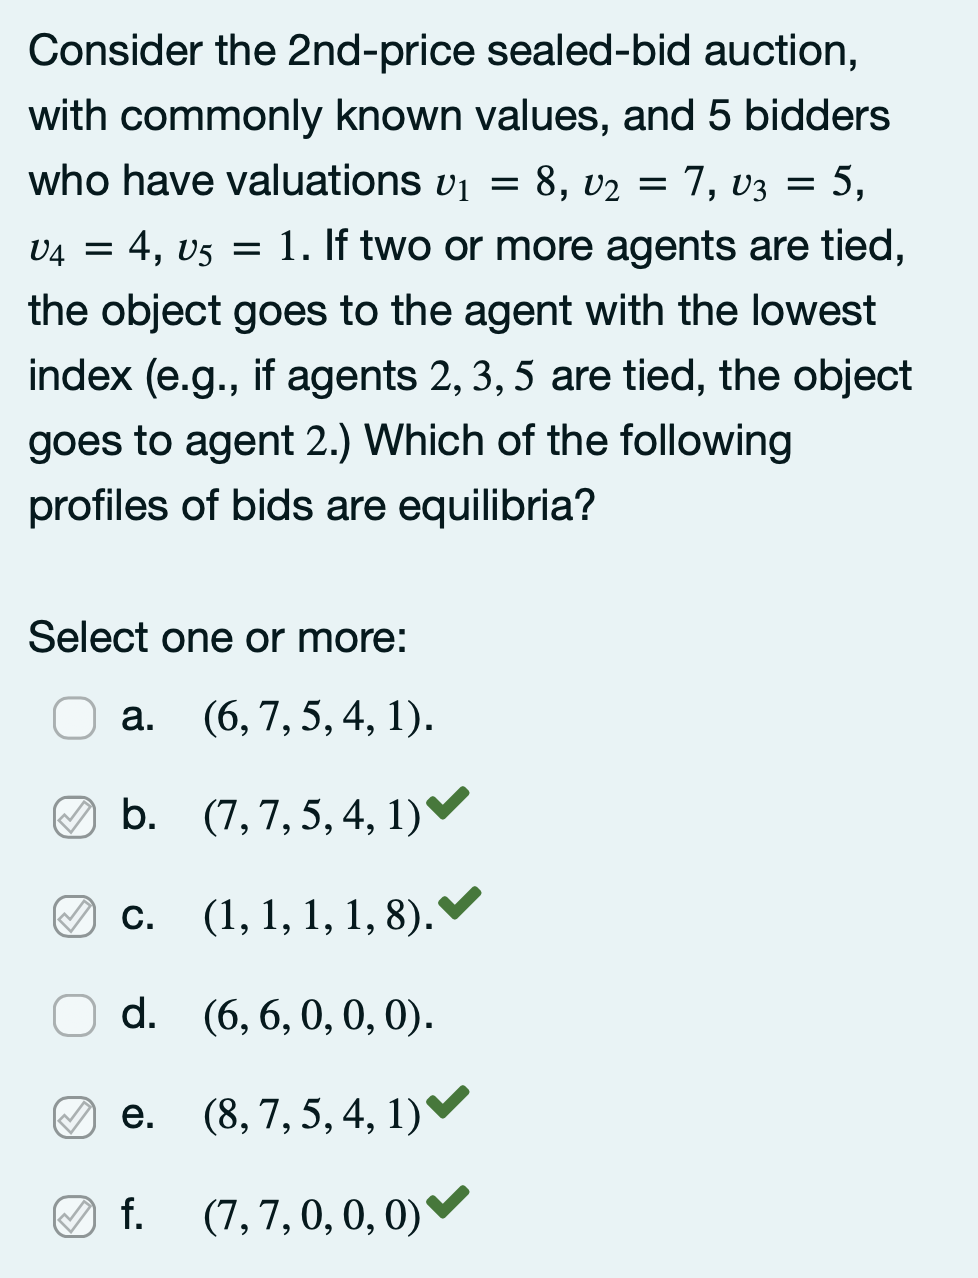 Consider the 2nd-price sealed-bid auction,
with commonly known values, and 5 bidders
who have valuations vi = 8, v2 = 7, v3 = 5,
v4 = 4, v5 = 1. If two or more agents are tied,
the object goes to the agent with the lowest
index (e.g., if agents 2, 3, 5 are tied, the object
goes to agent 2.) Which of the following
profiles of bids are equilibria?
Select one or more:
а.
(6, 7, 5, 4, 1).
O b. (7,7,5, 4, 1)▼
O C.
(1, 1, 1, 1, 8).'
d. (6, 6,0, 0, 0).
e. (8, 7, 5, 4, 1)
е.
f.
(7,7, 0, 0, 0)▼
